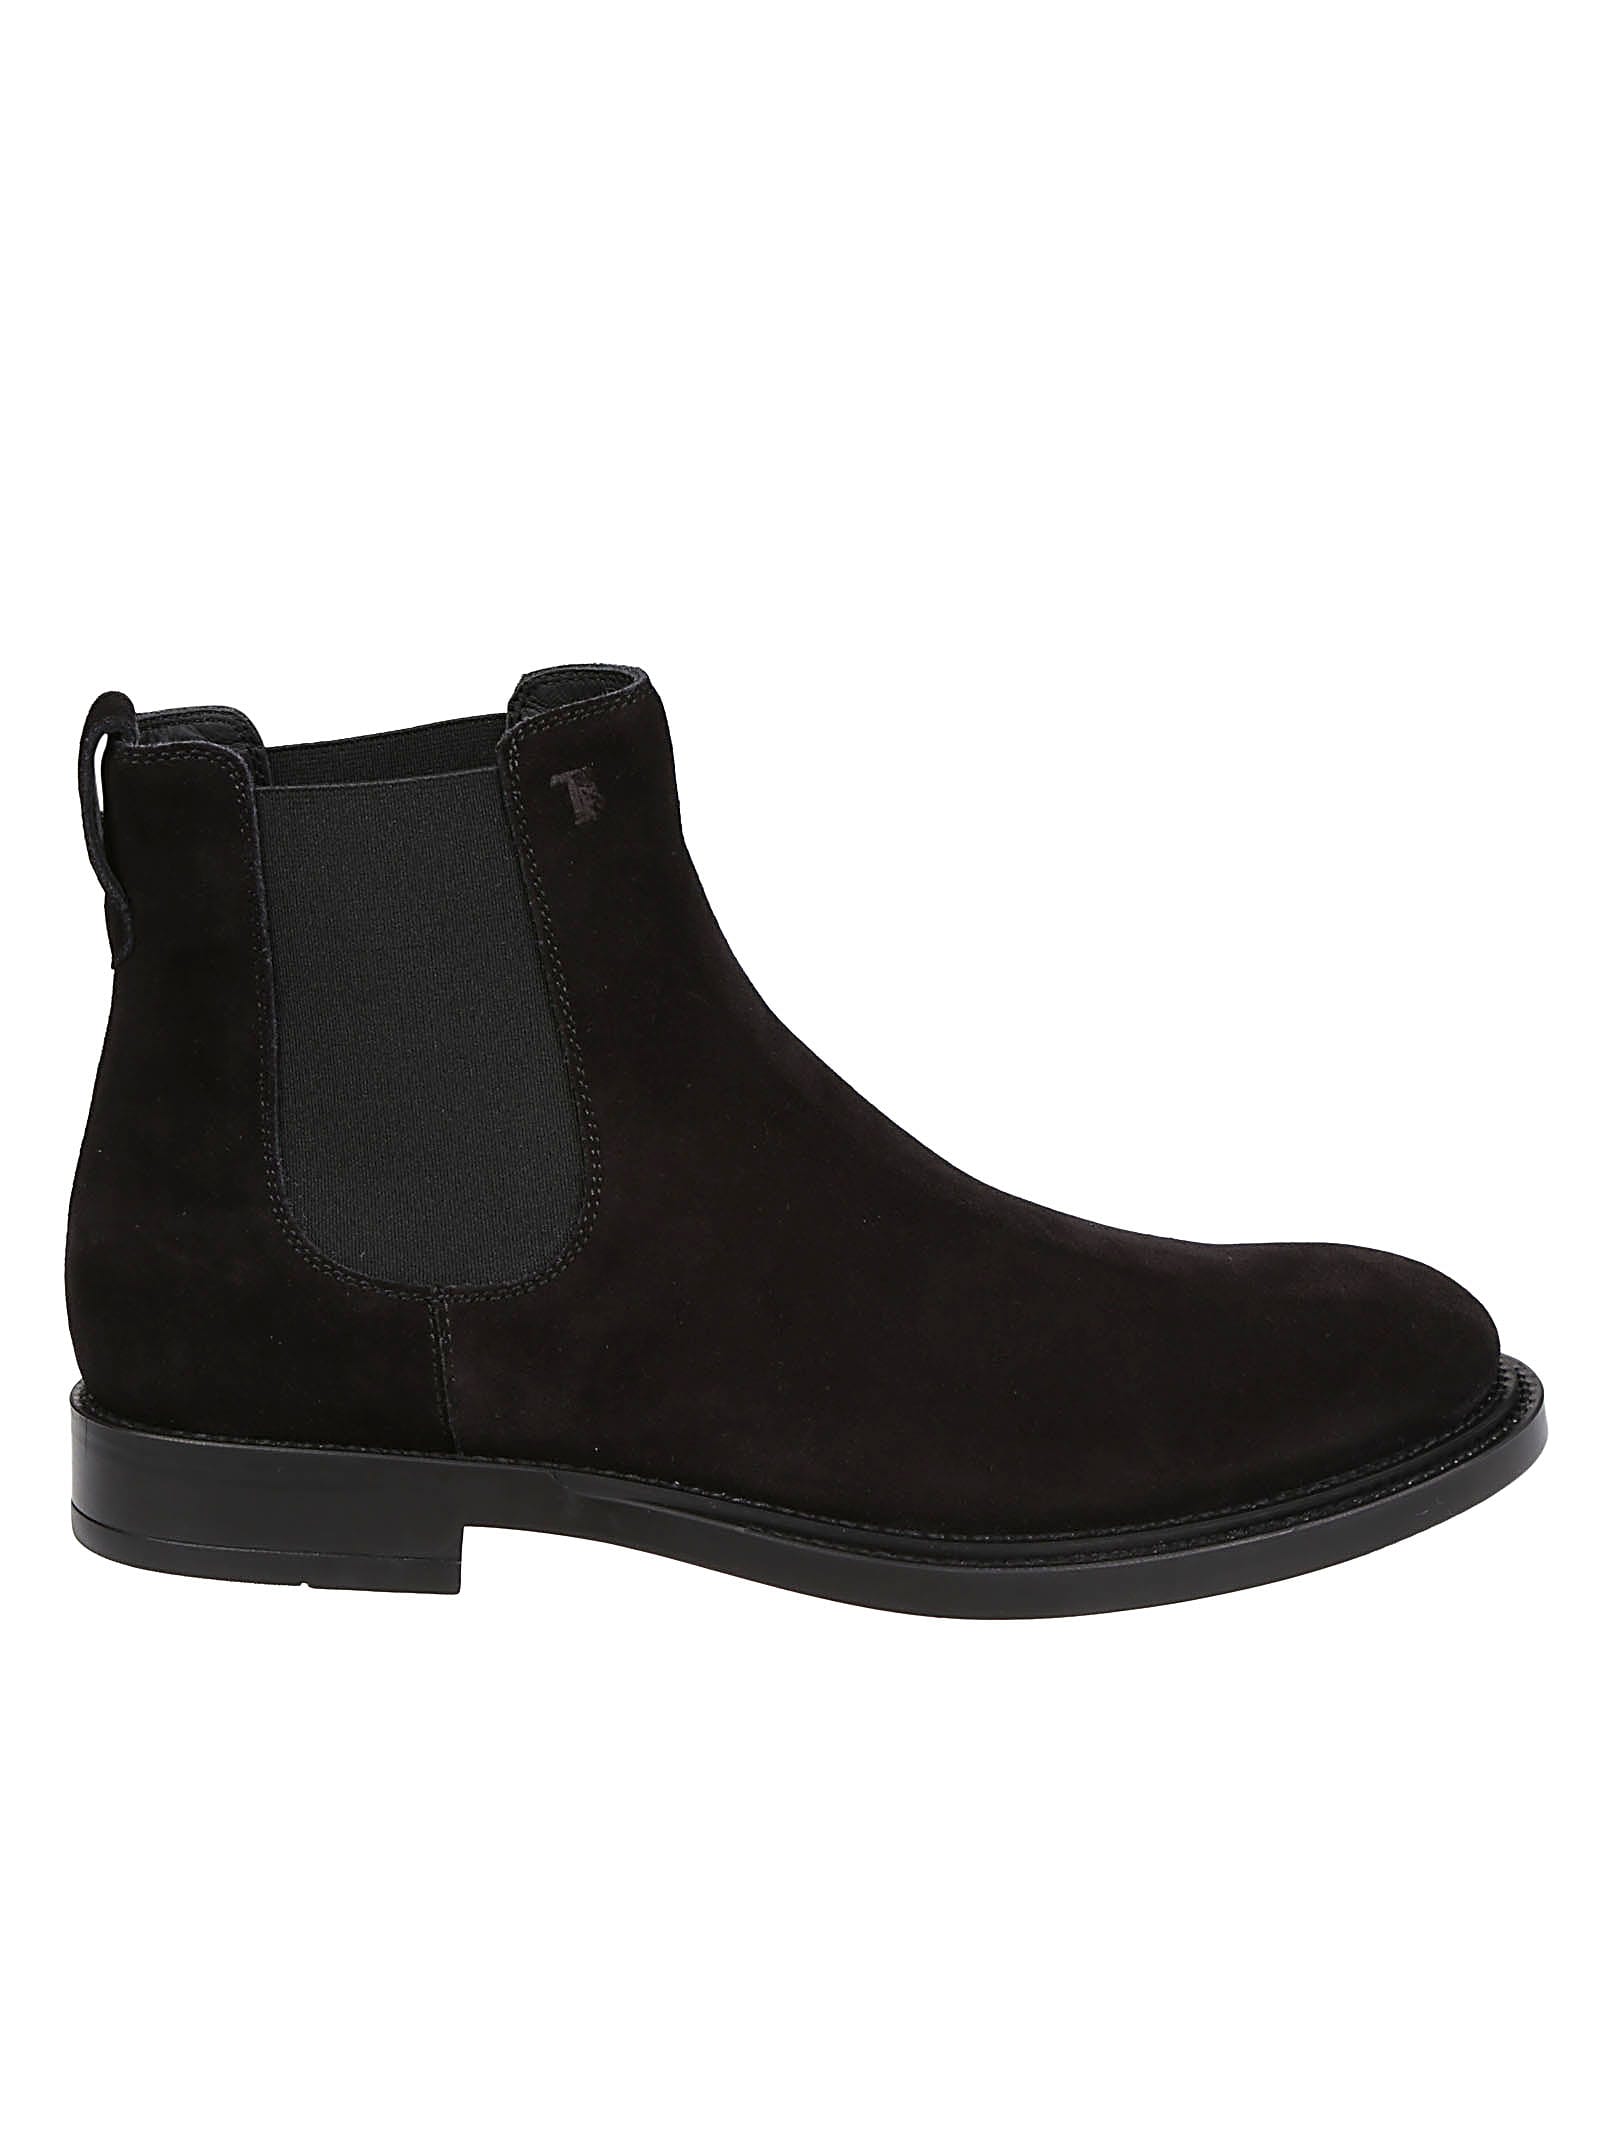 62c Formal Ankle Boots